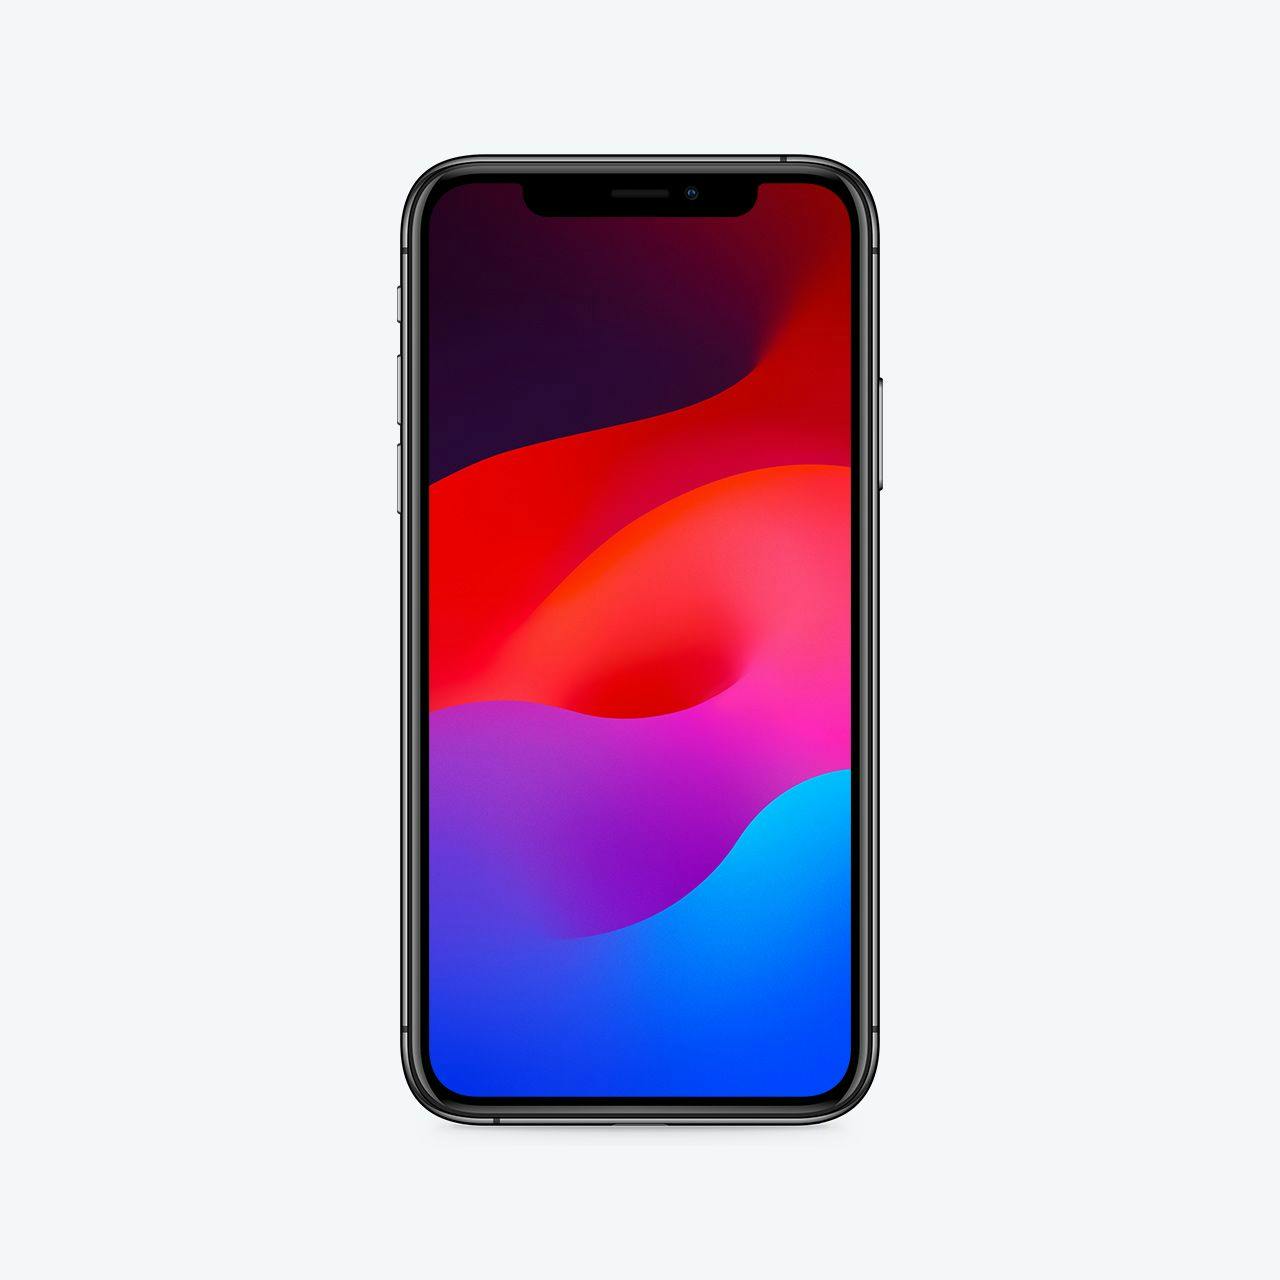 Image of iPhone 11 Pro.